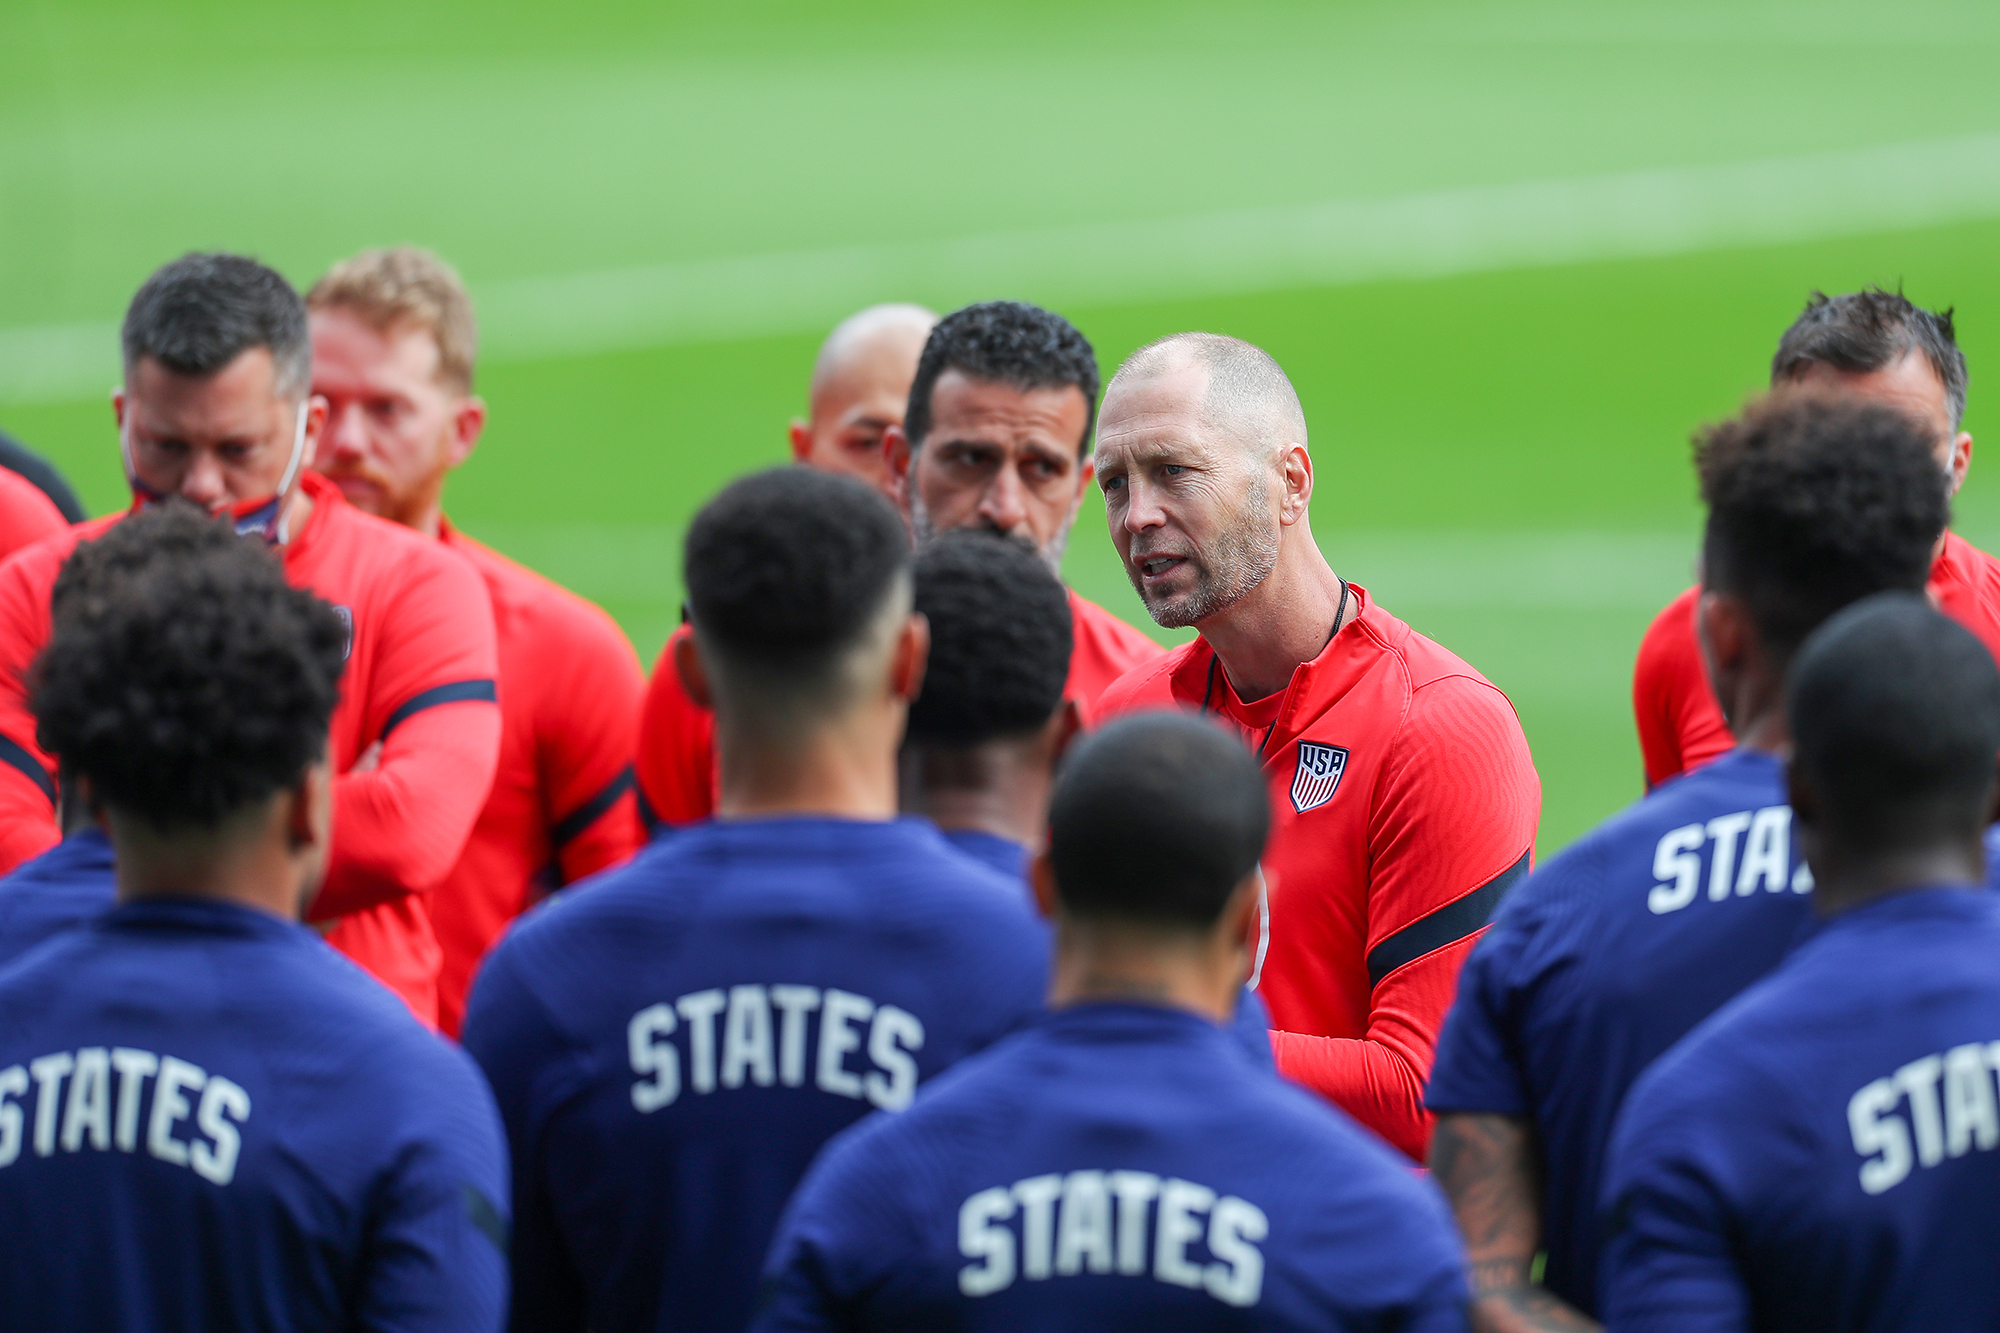 Berhalter said that his squad was facing “nervy times” heading into Qatar.